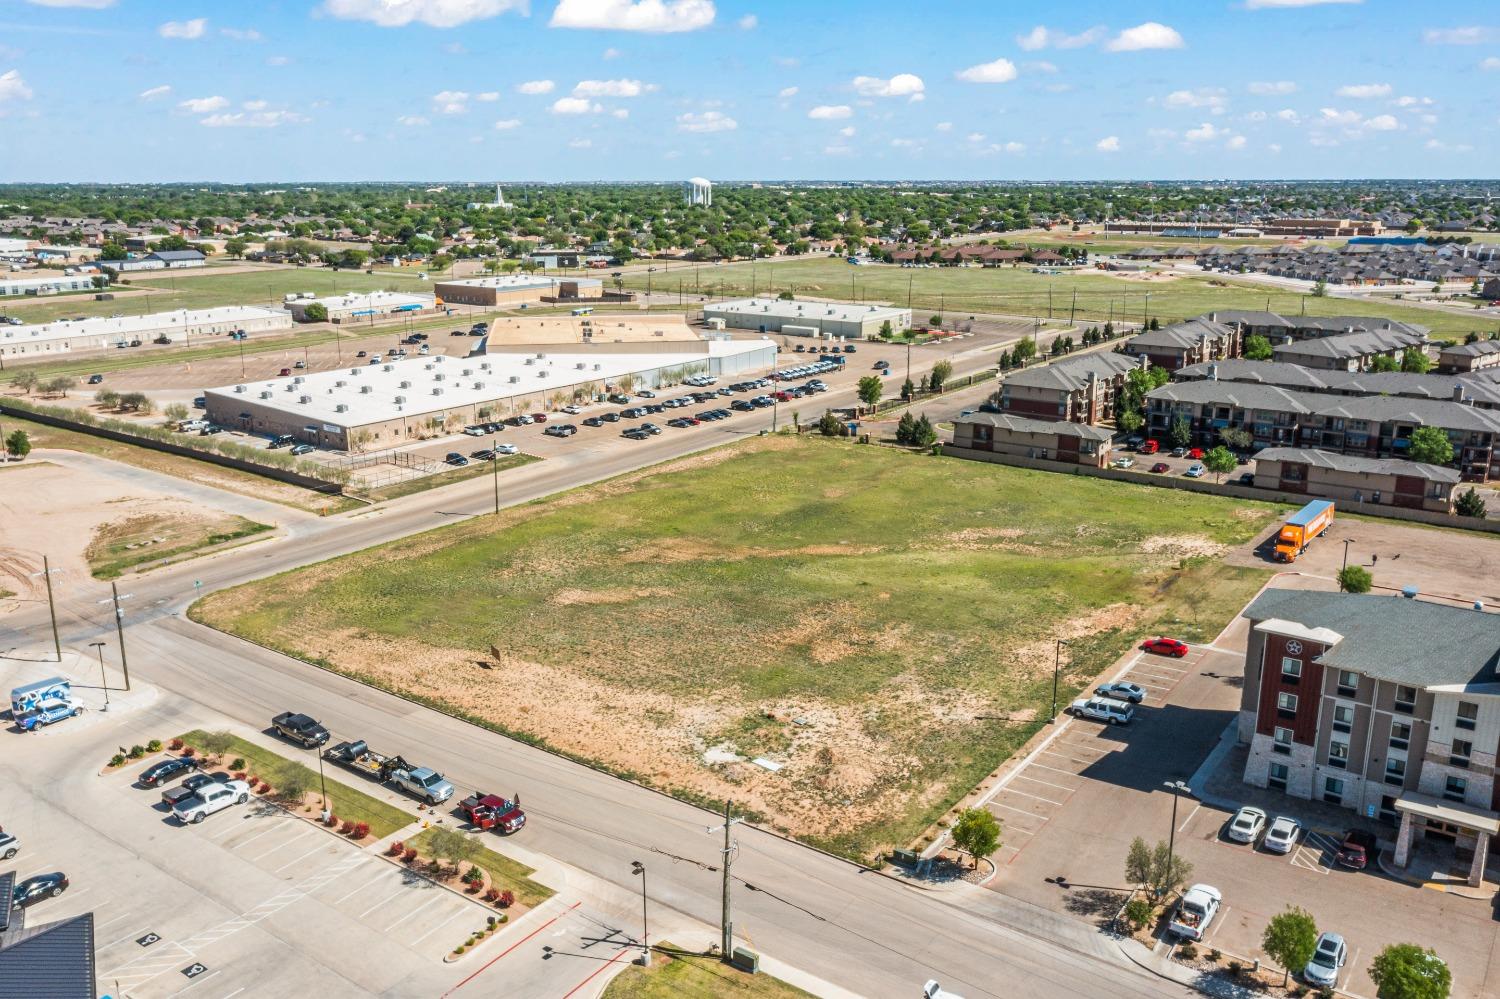 Located in a bustling commercial hub at 6201 62nd Street, this 1.96-acre site along Milwaukee Avenue is a premier opportunity within Lubbock's vibrant landscape. A blank canvas, ideal for a variety of developments including hotels or shopping plazas, this LM-1 zoned property benefits from its placement in Frenship ISD and oversight by the High Plains Water District. With excellent access and visibility, it stands ready to tap into the commercial heartbeat of Lubbock. Seize this strategic location to transform your vision into reality and capitalize on its limitless potential.